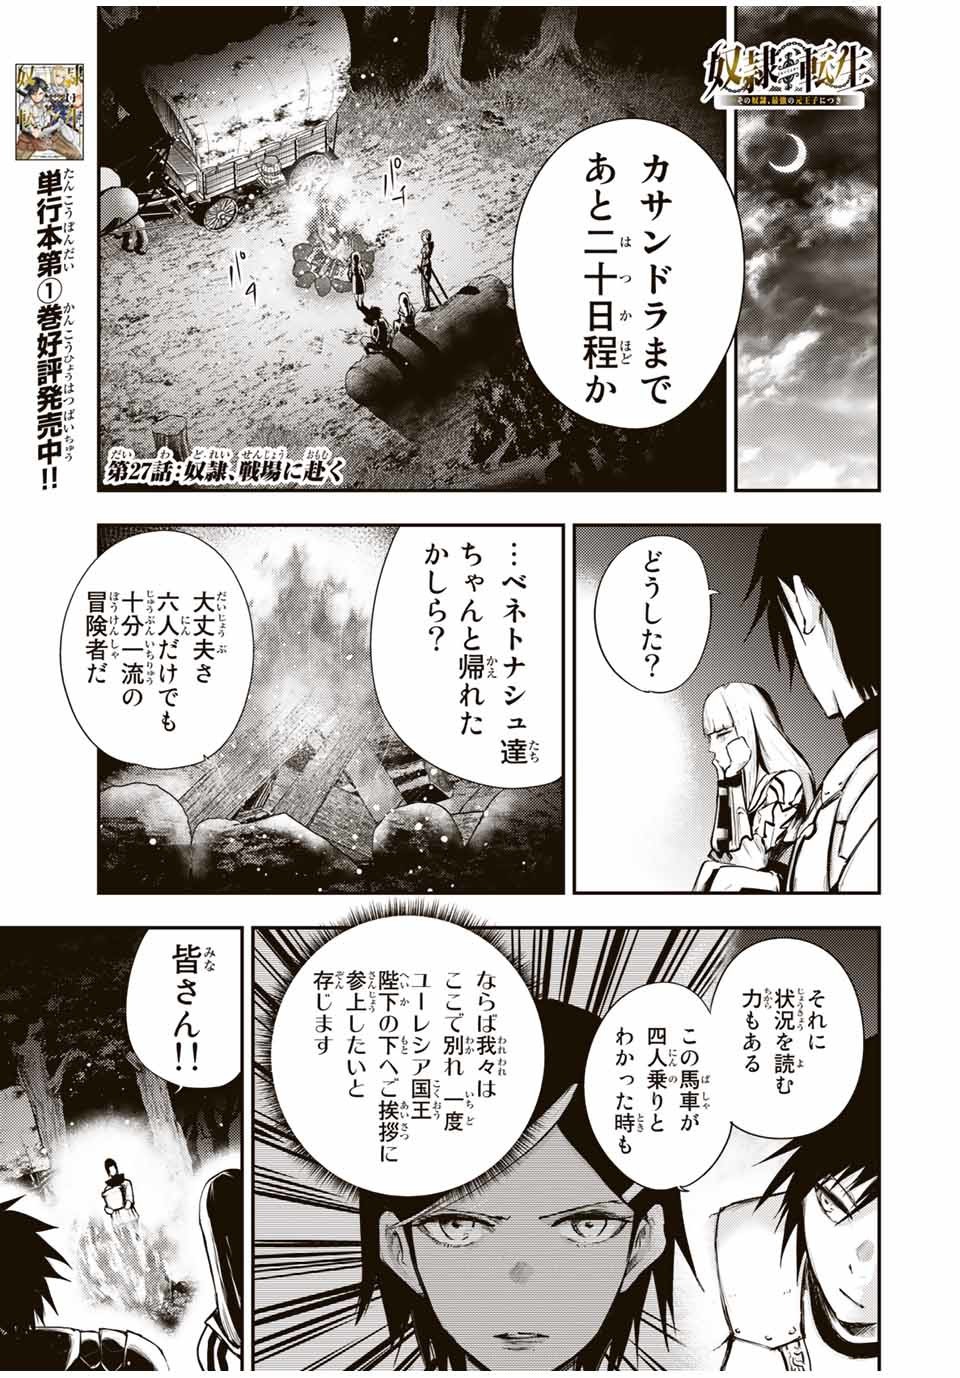 the strongest former prince-; 奴隷転生 ～その奴隷、最強の元王子につき～ 第27話 - Page 1